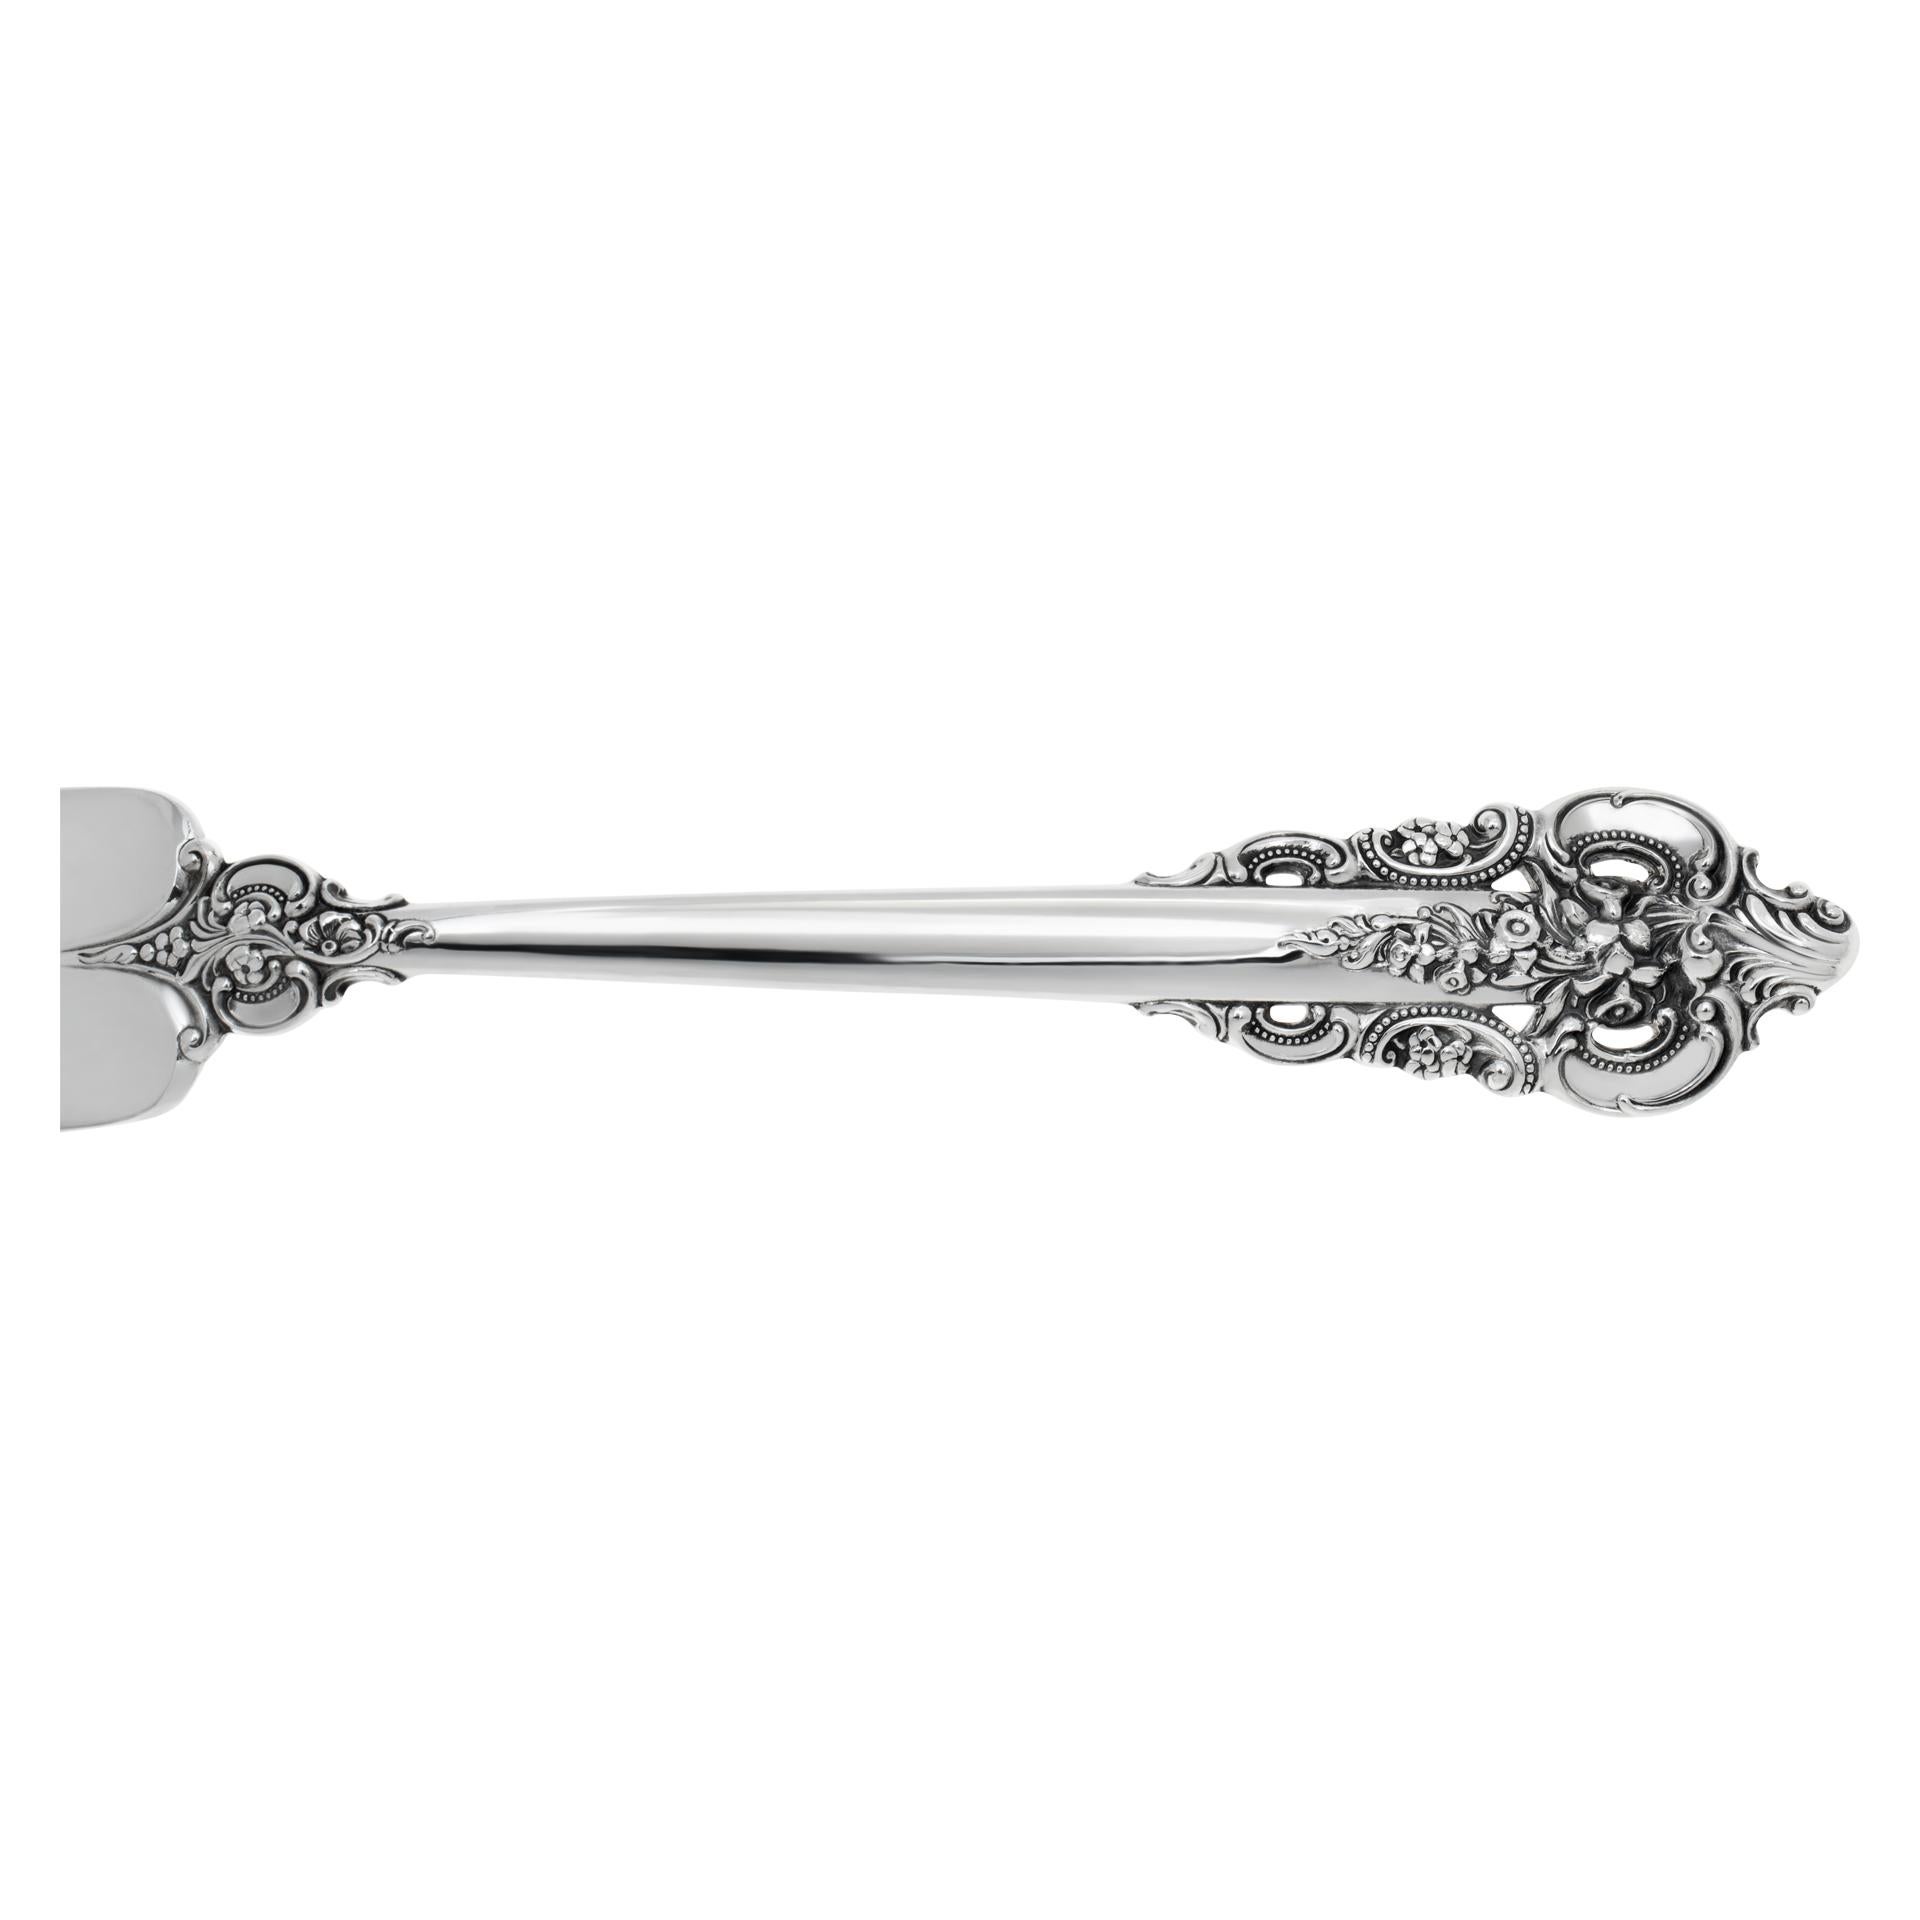 GRANDE BAROQUE sterling silver flatware set, patented by Wallace in 1941- 5 place setting for 8 ad desciption carefully). Over 57 troy ounces .925 sterling silver (counting stainless steel blade pieces as 1.00 ounce troy each). PLACE SET: 7 dinner